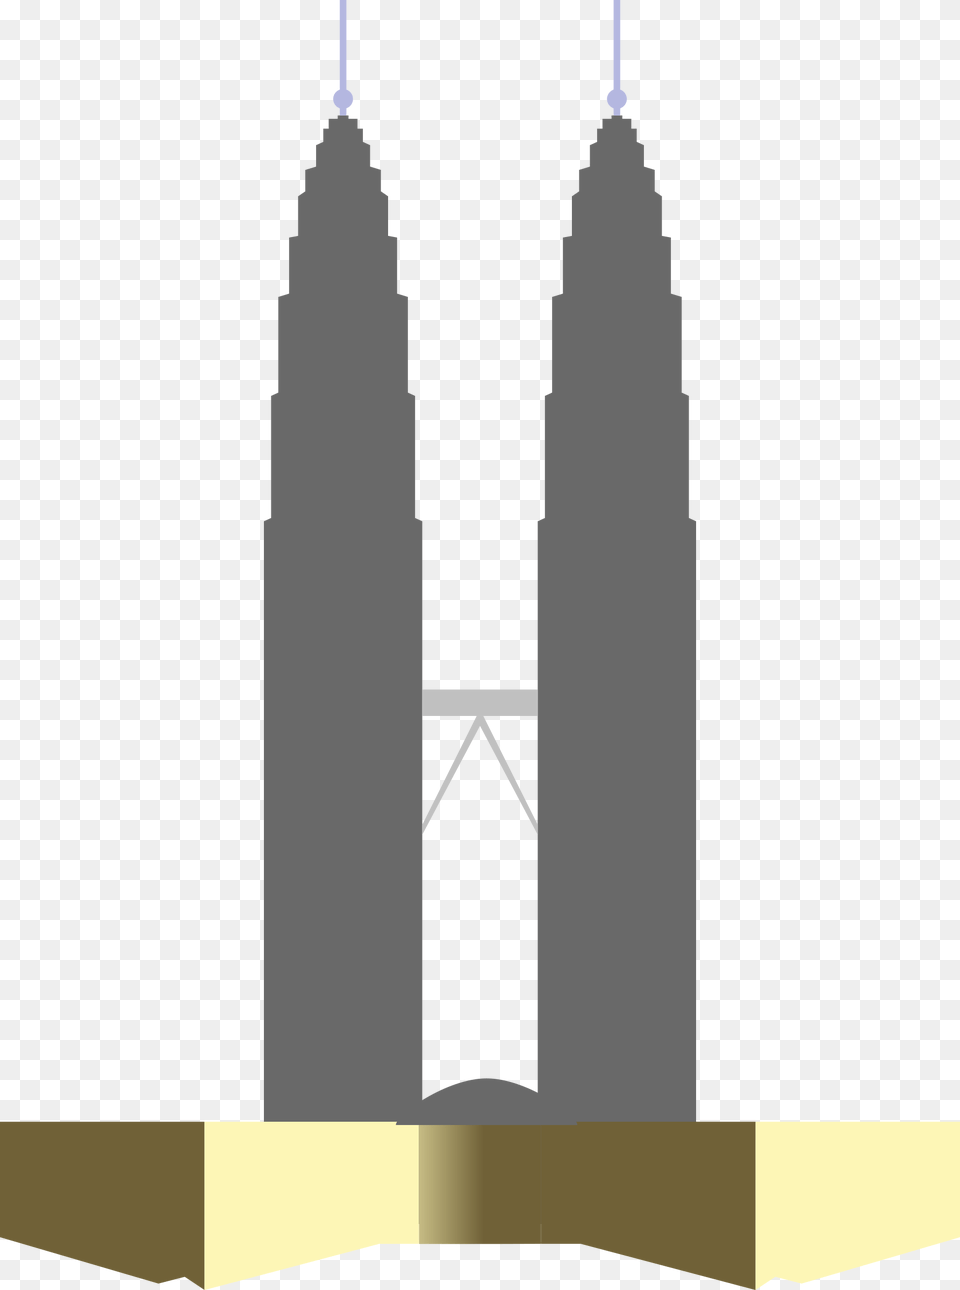 Eiffel Tower Clipart Petronas Tower Petronas Towers Silhouette, Architecture, Building, City, Spire Free Png Download